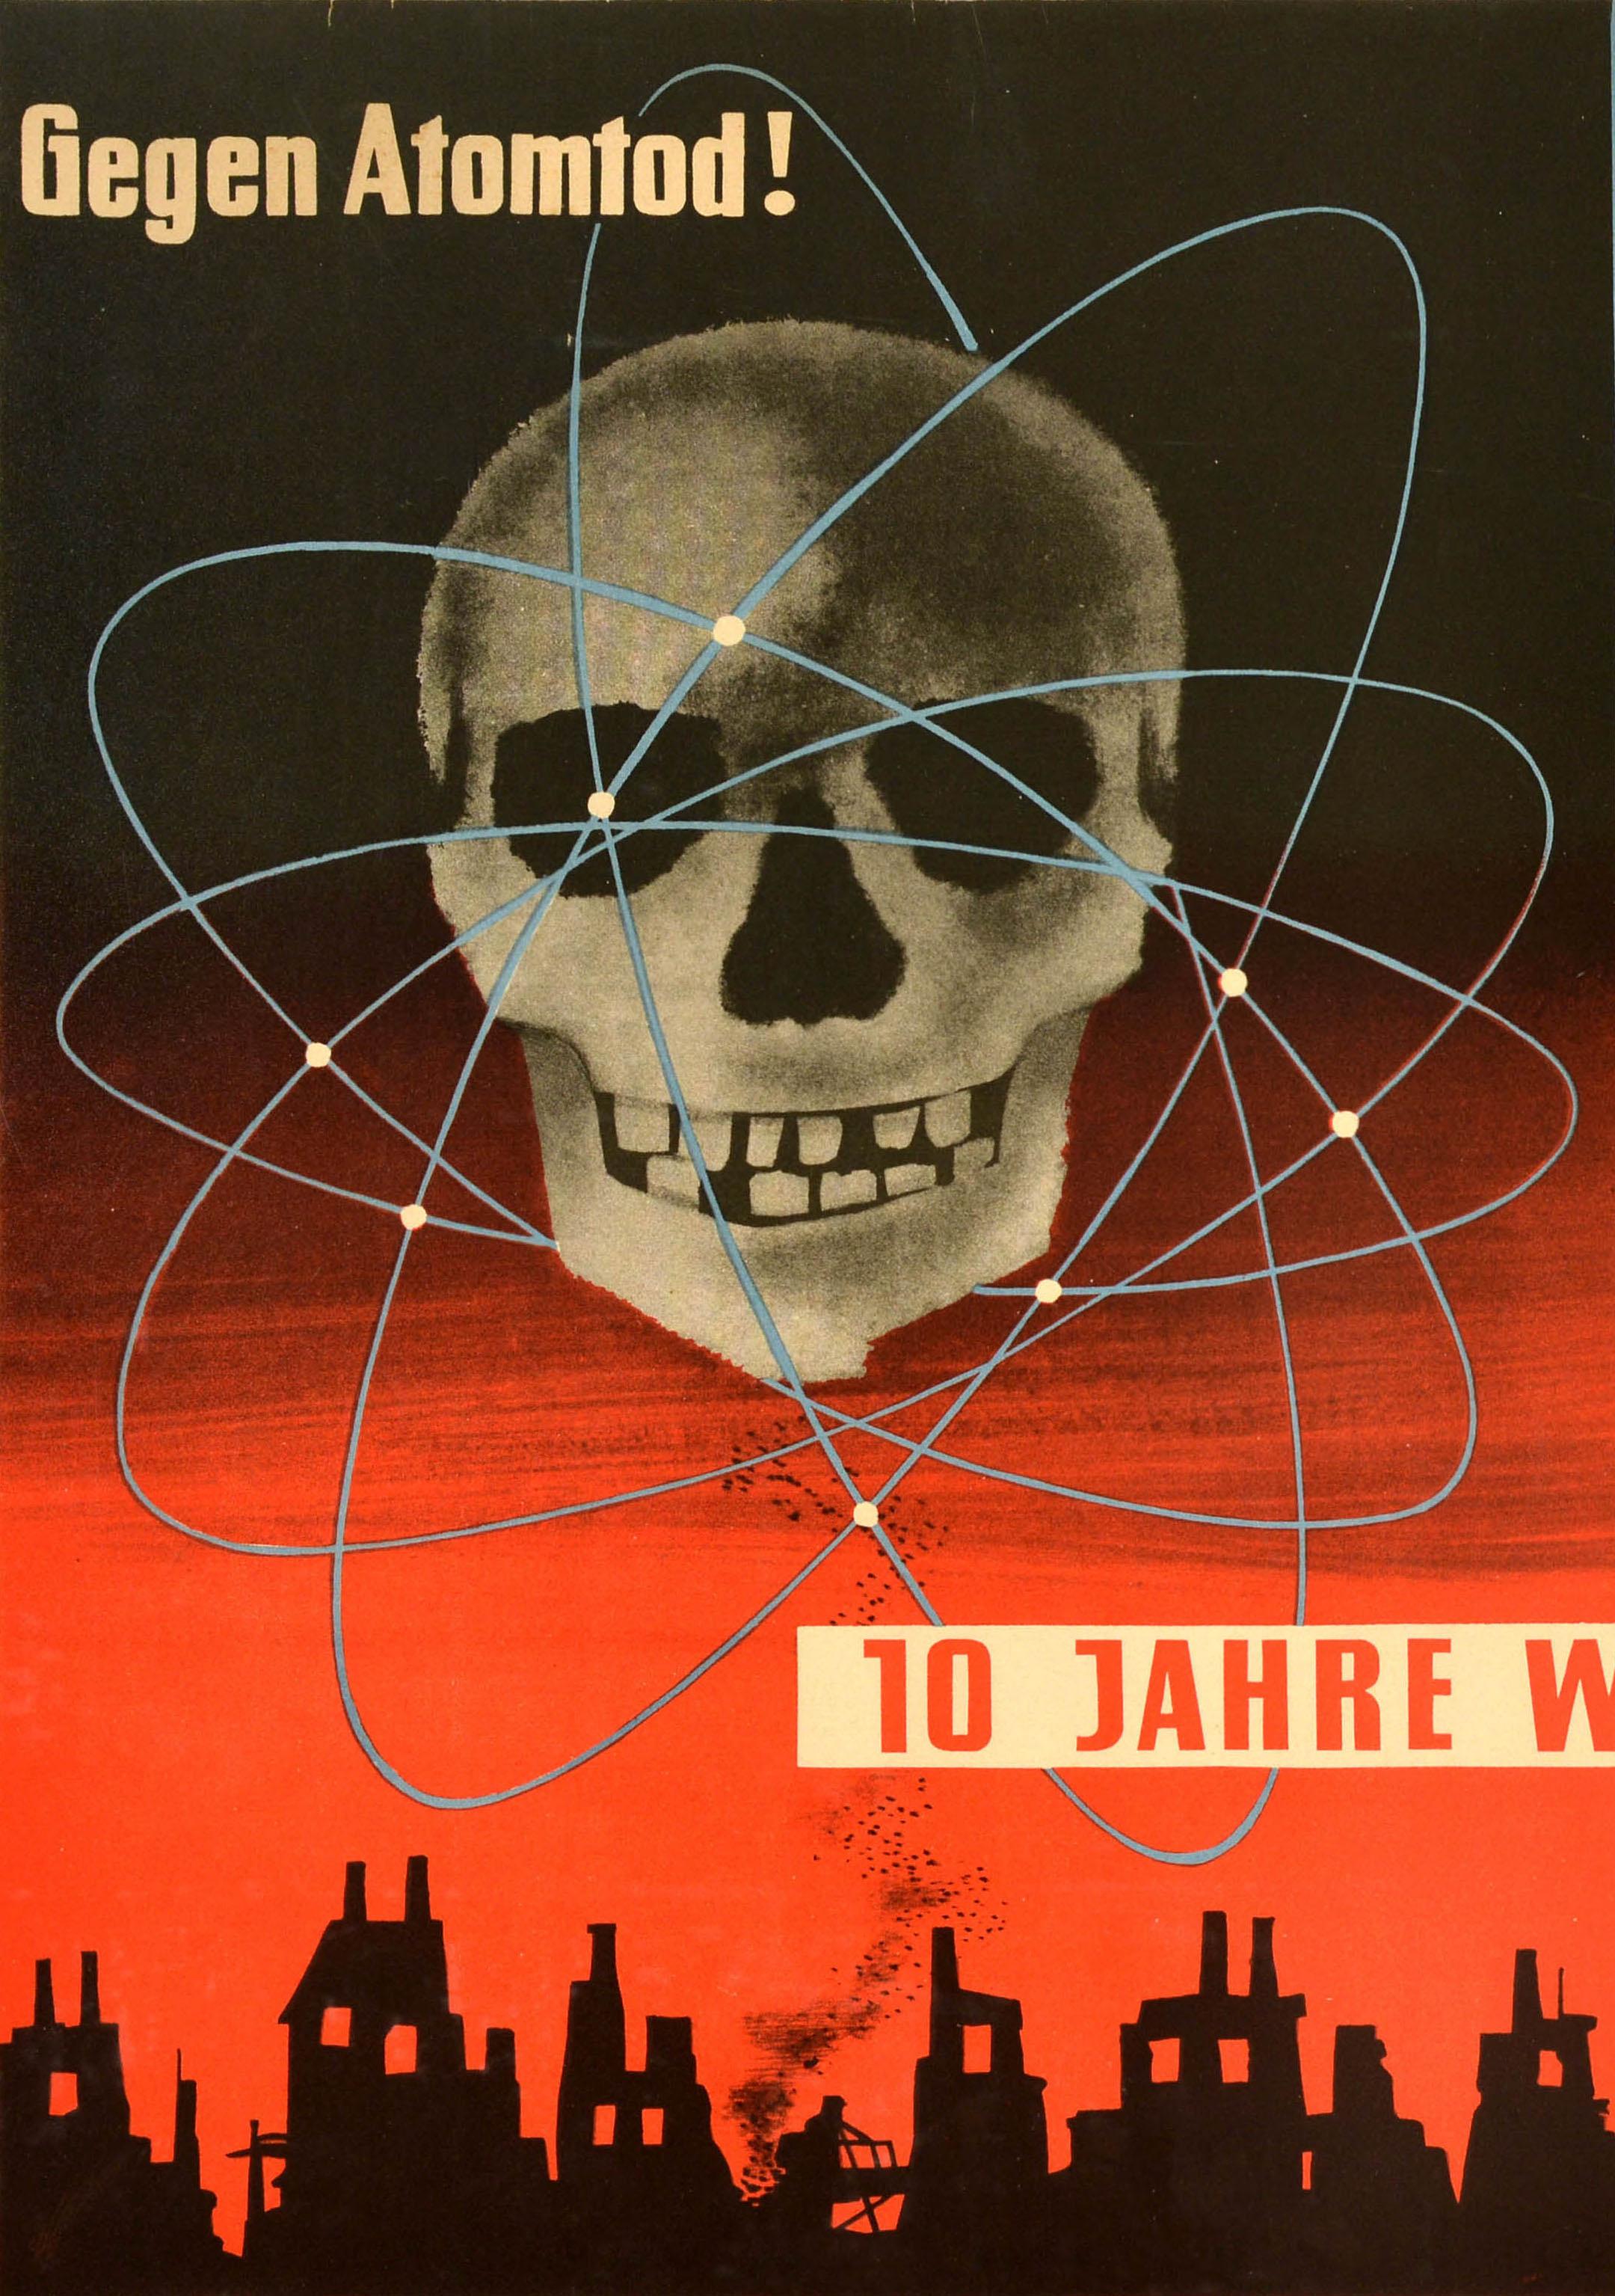 Original vintage propaganda poster - Gegen Atomtod! Fur Frieden! 10 Jahre Weltfriedensbewegung / Against nuclear death! For peace! 10 years of the world peace movement - featuring an illustration of a skull surrounded by the atom symbol above war